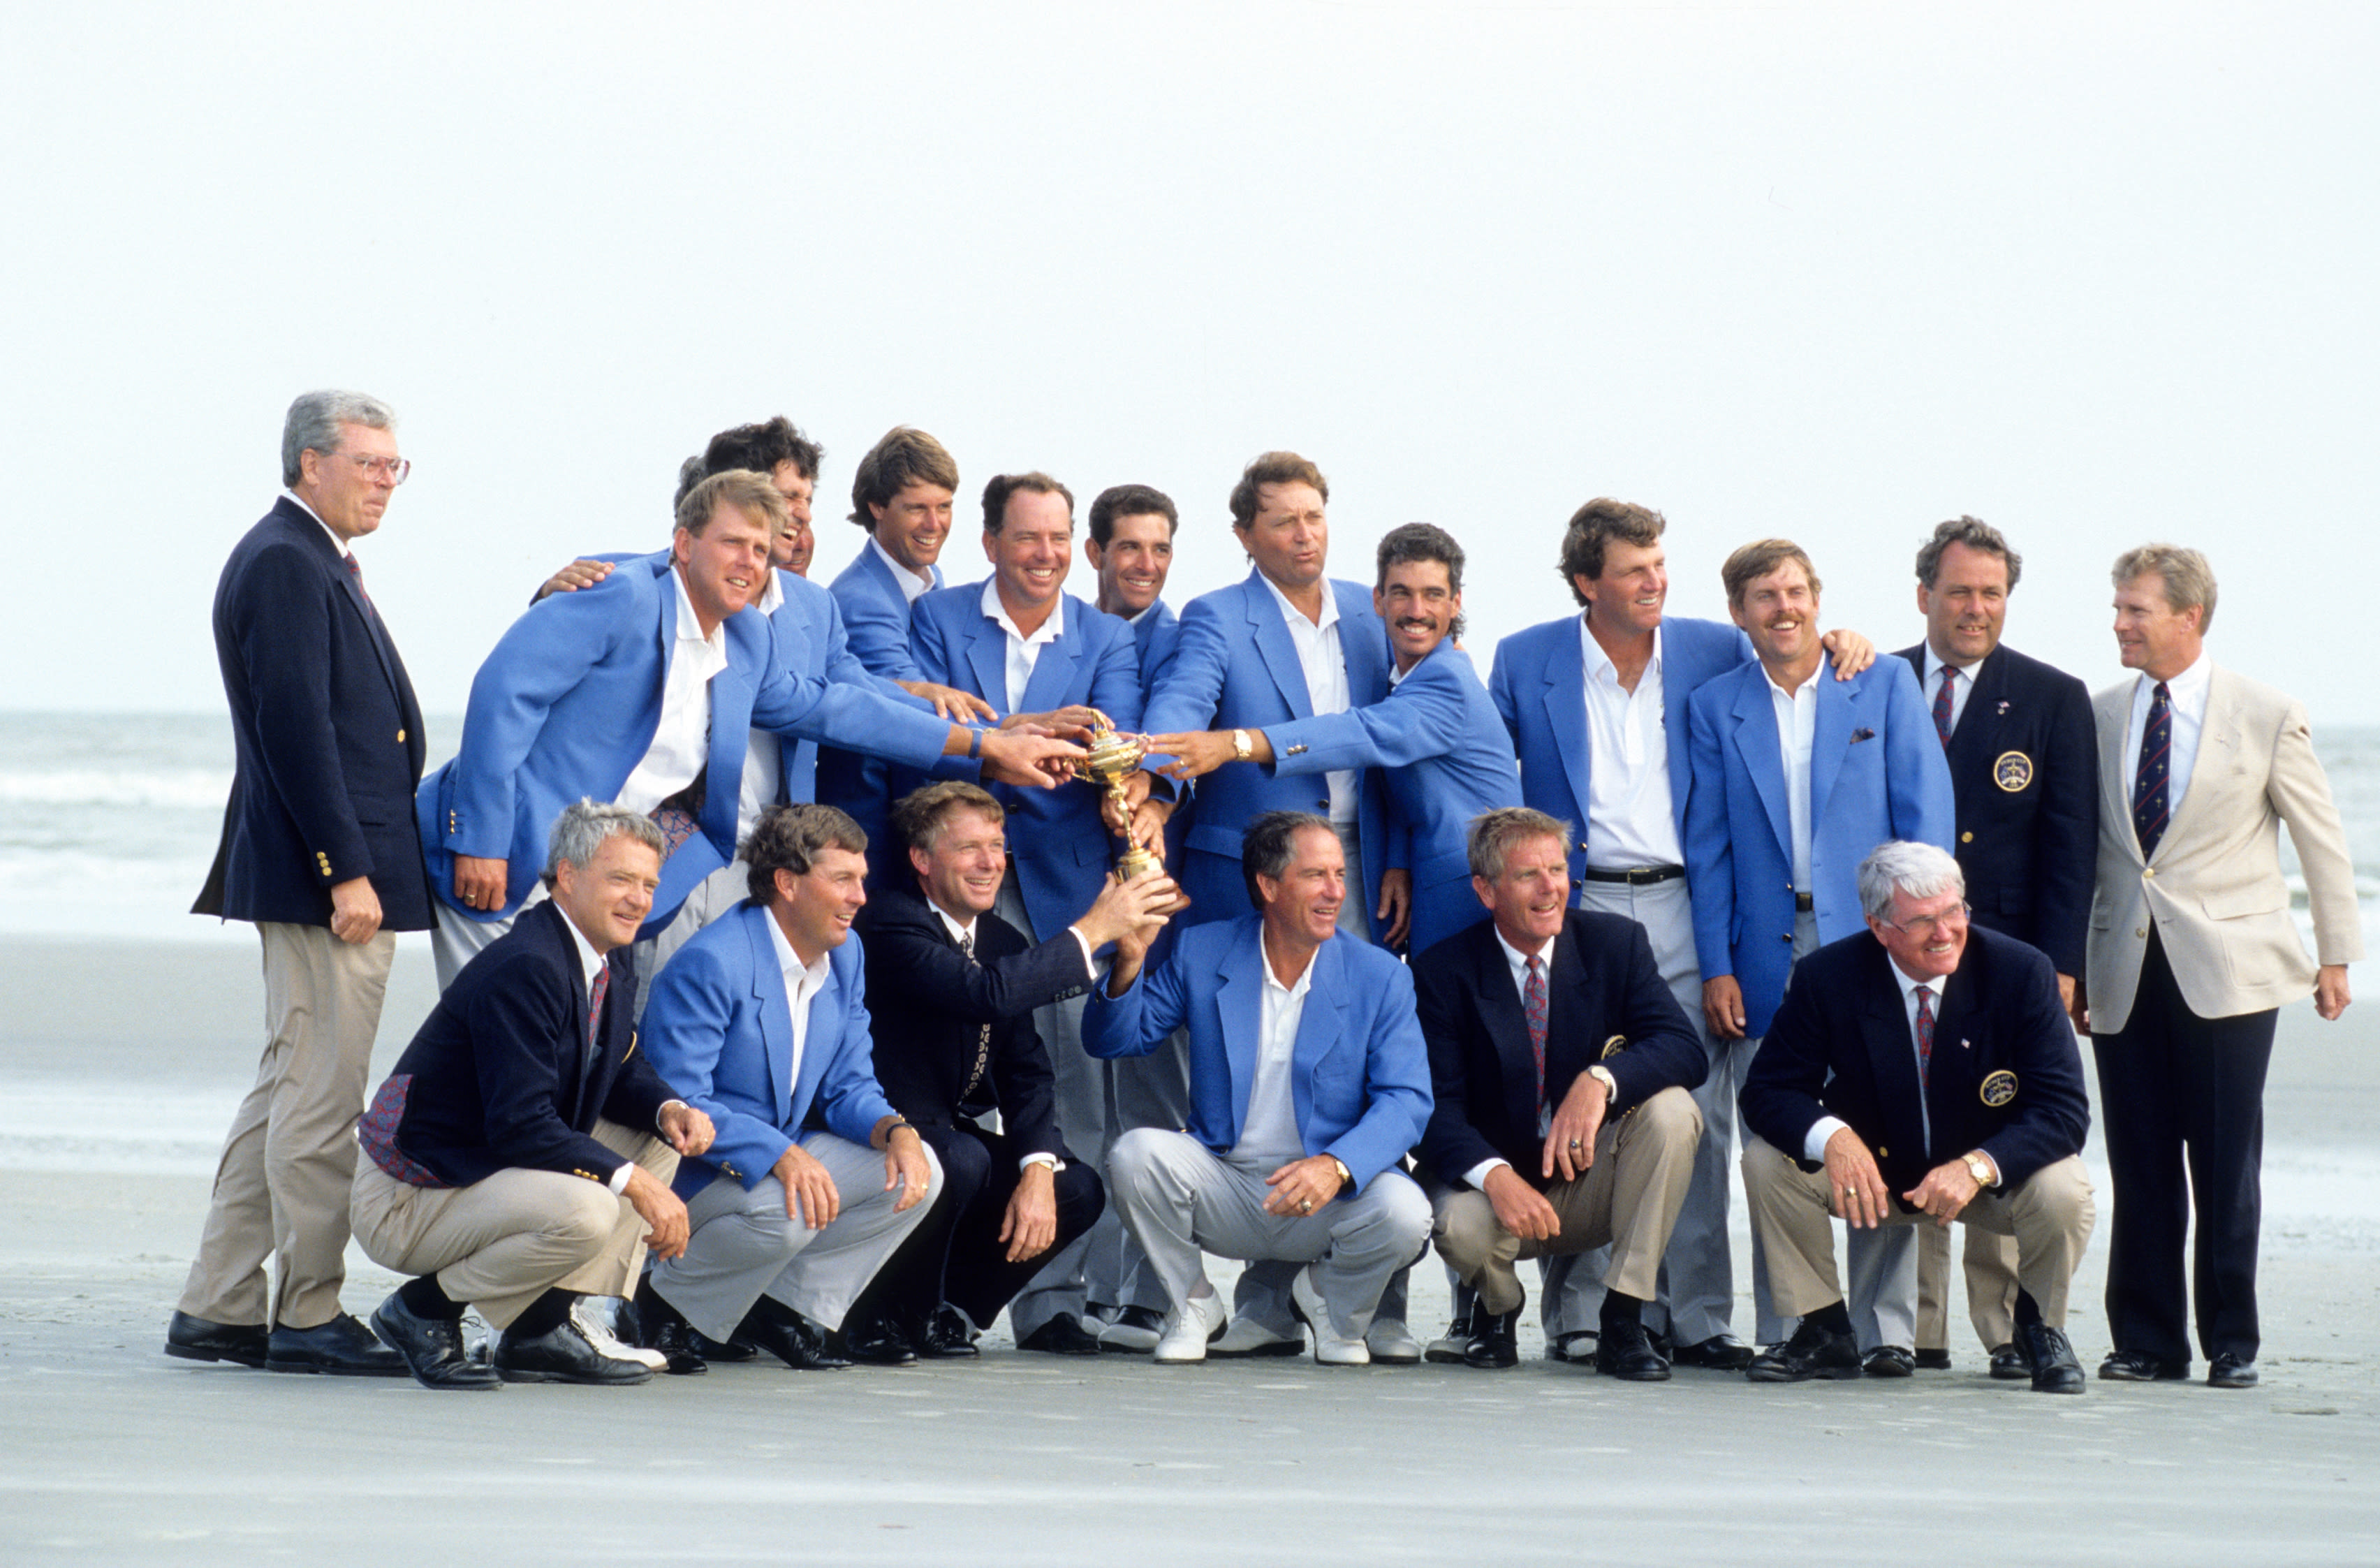 Smith (first row, two right of trophy) was PGA President during the U.S. Ryder Cup Team's memorable win at Kiawah Island in 1991.